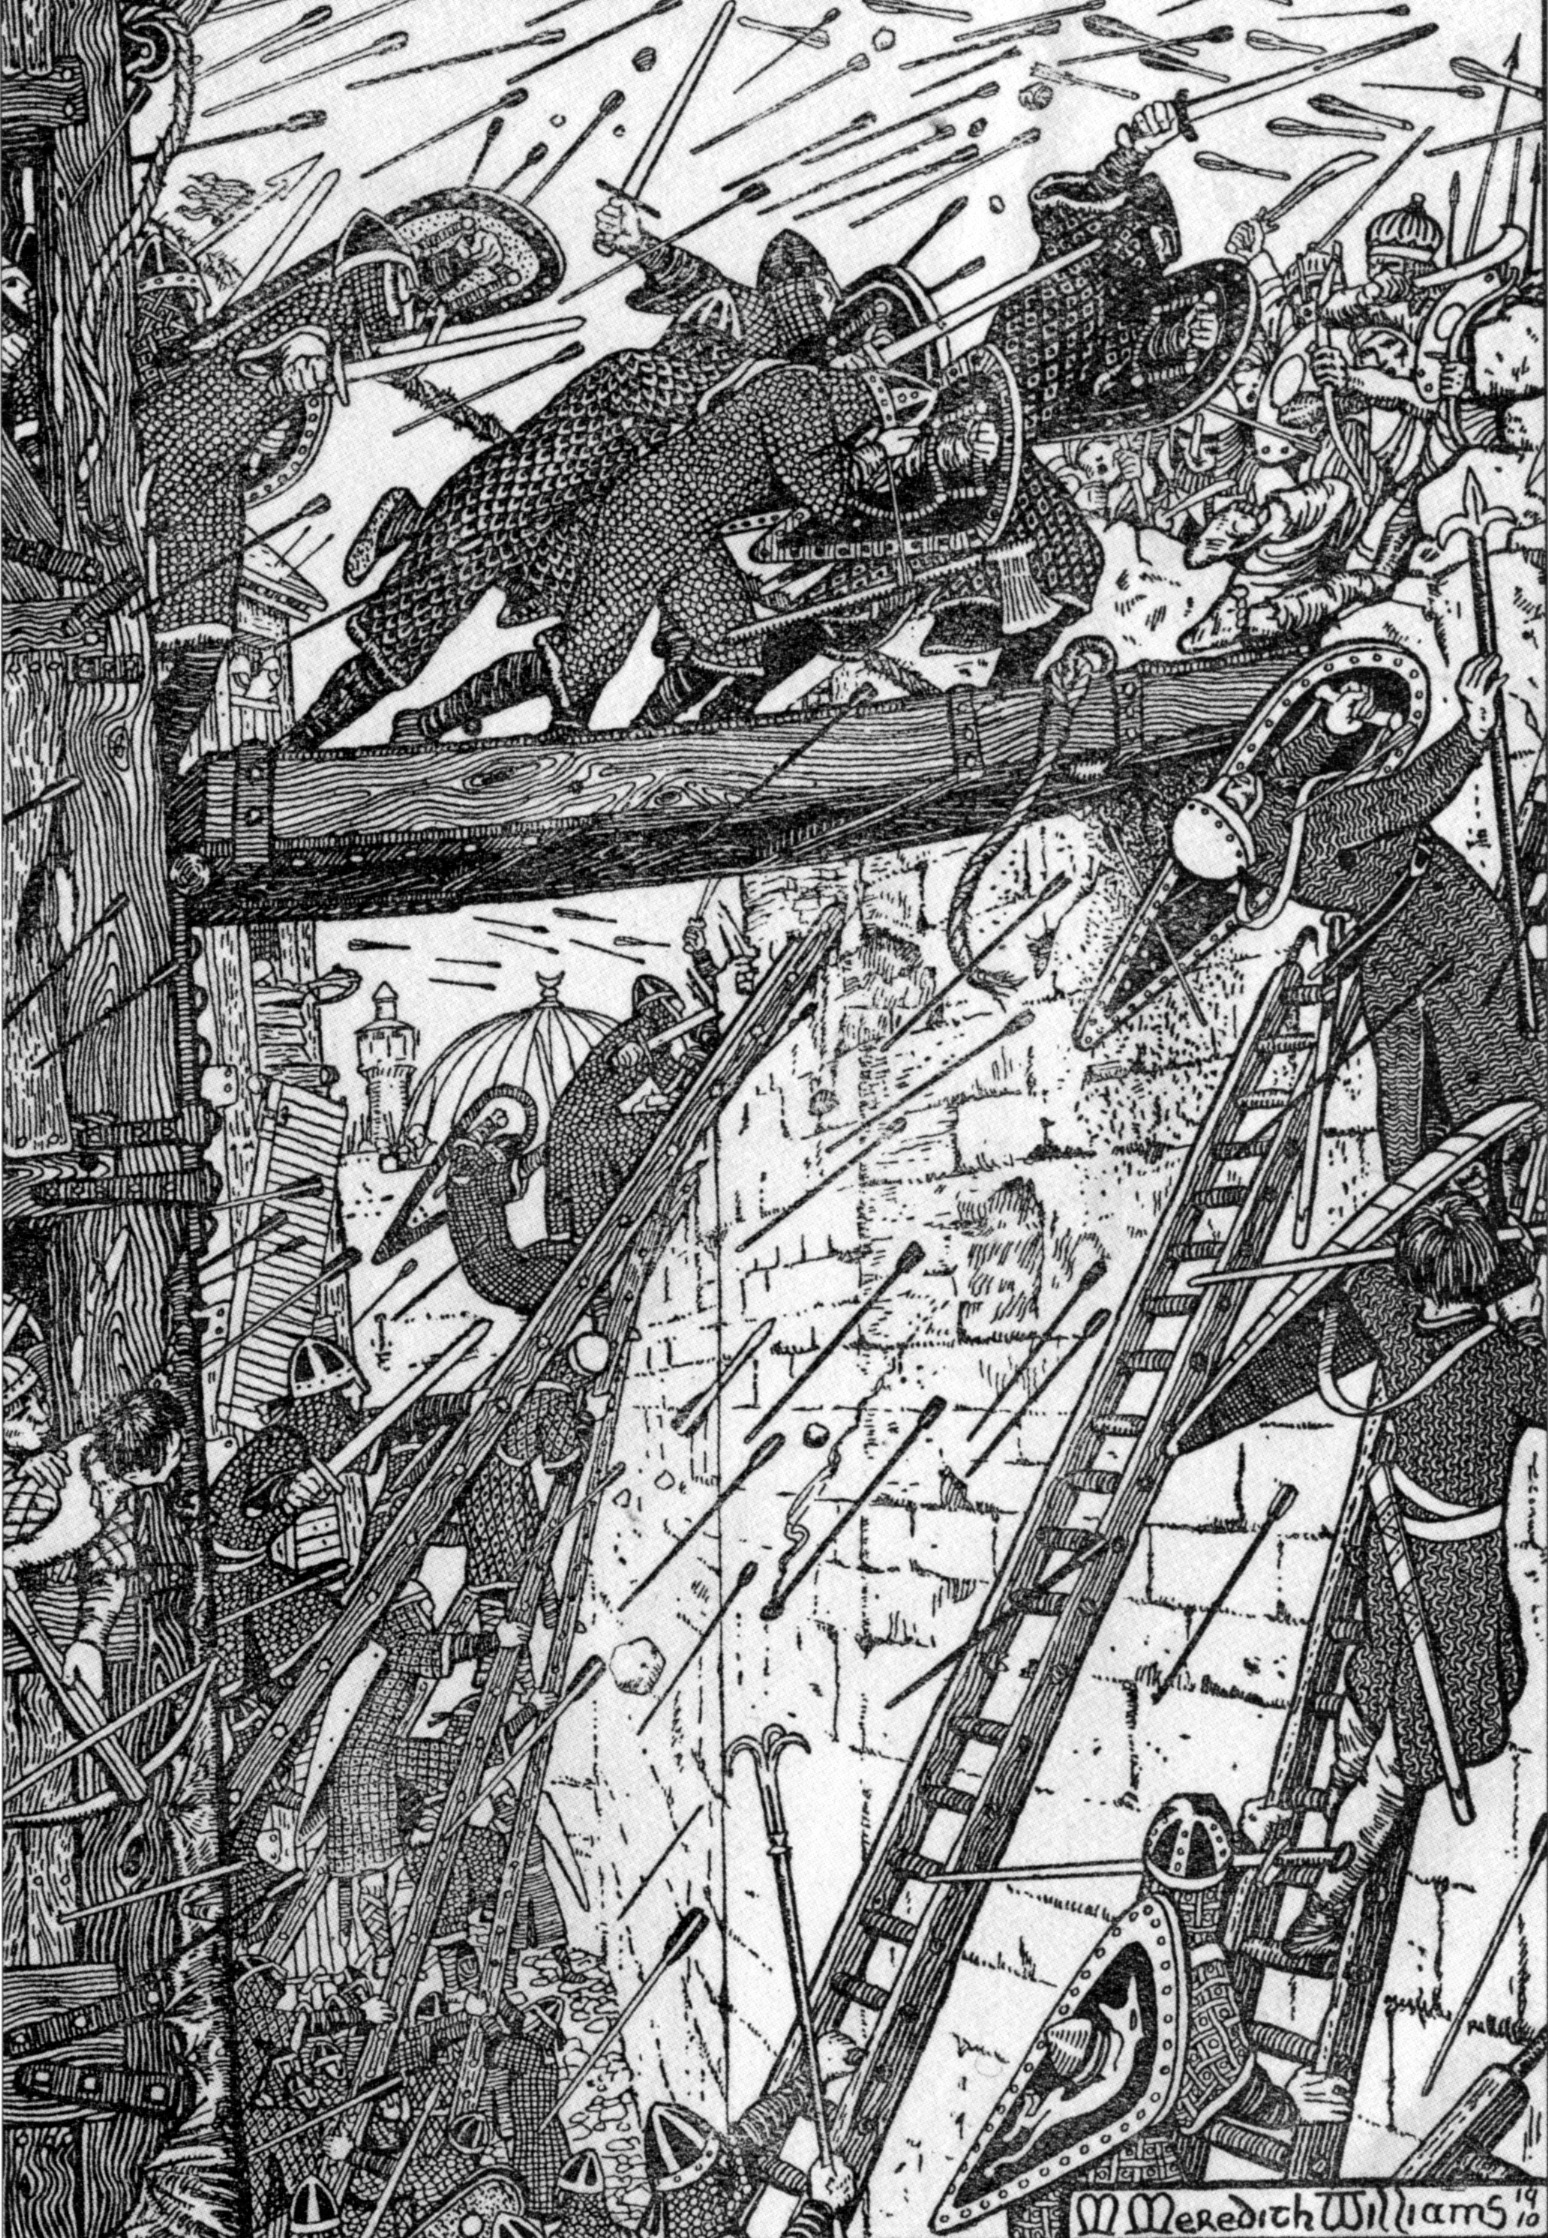 Crusaders from Godfrey of Boulogne’s seige tower battle their way onto the wall of Jerusalem, as their comrades climb scaling ladders. Although the Franks captured Jerusalem, they could not rest until they had defeated the Fatimid Egyptian relief army assembling at Ascalon on August 12. 